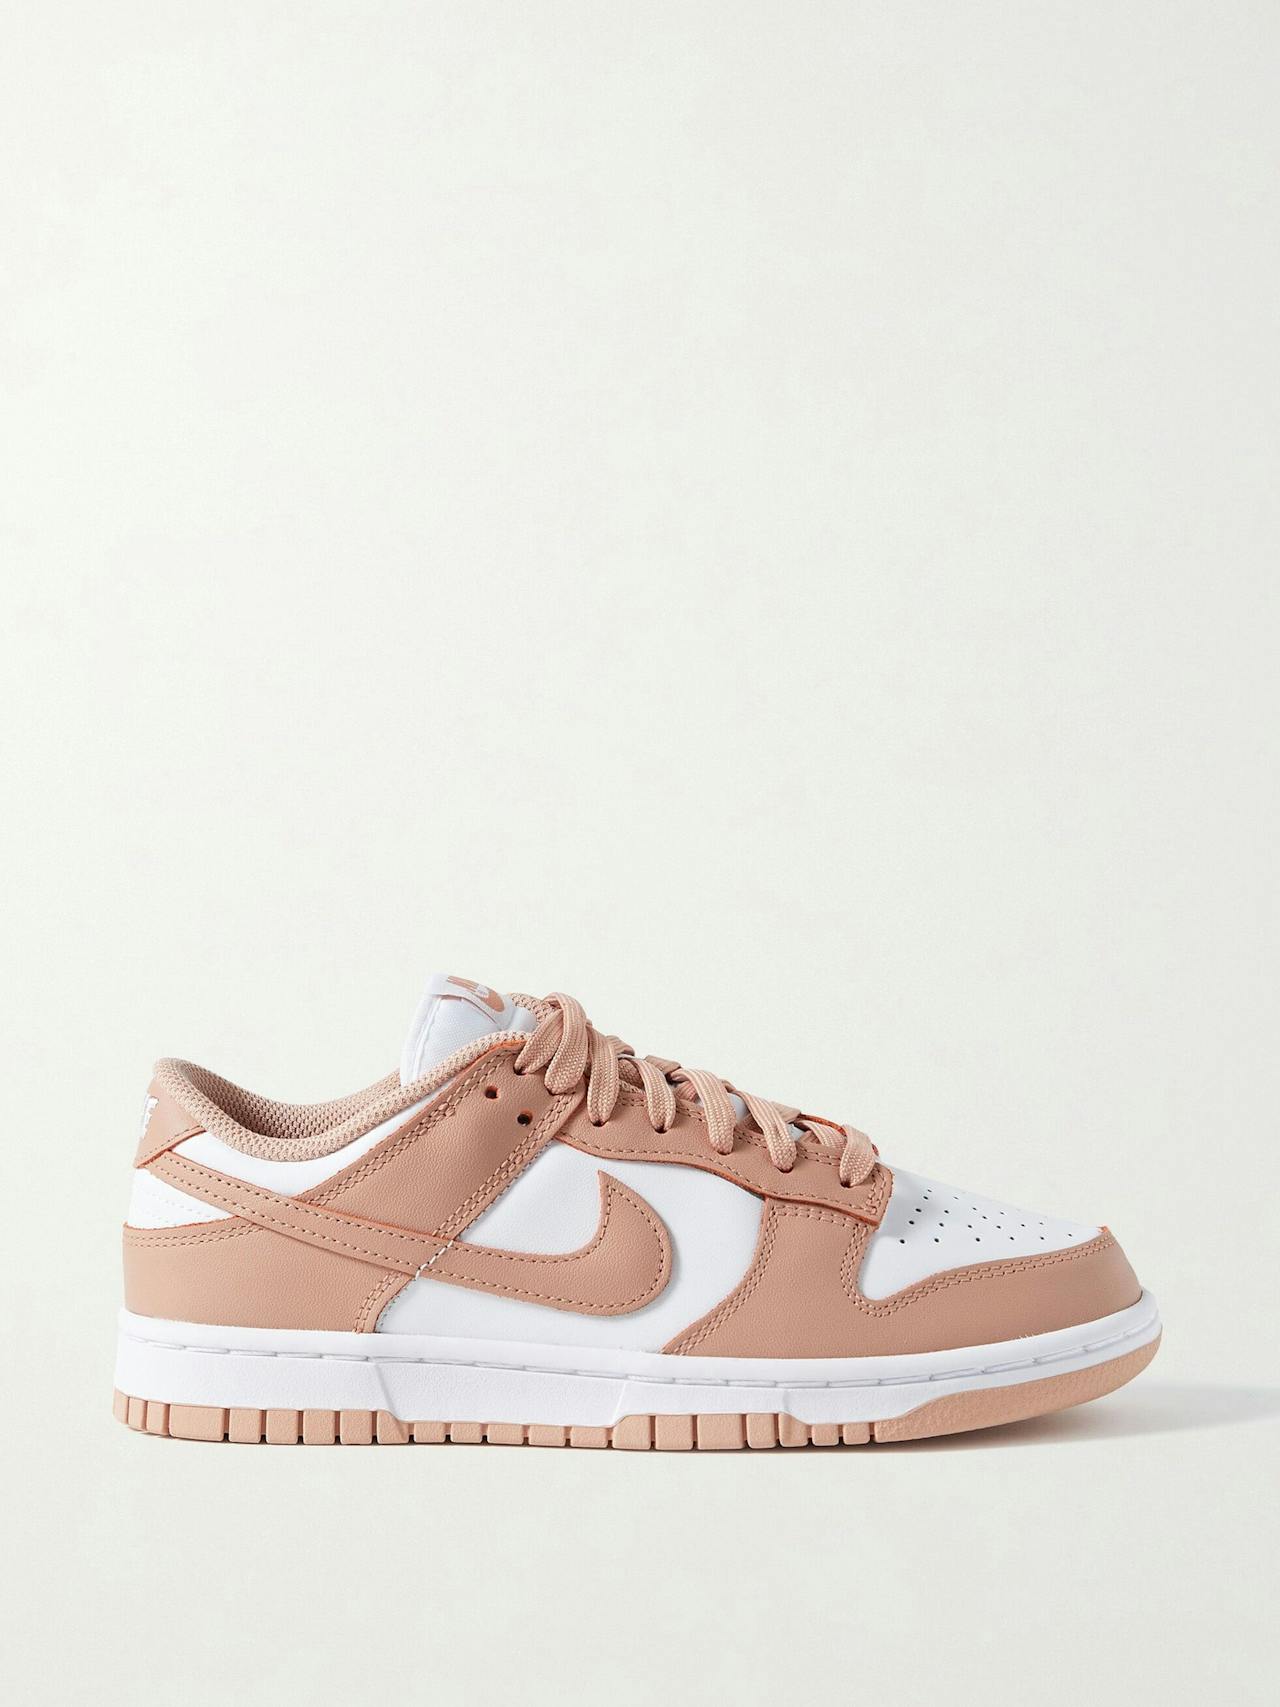 Dunk Low leather sneakers